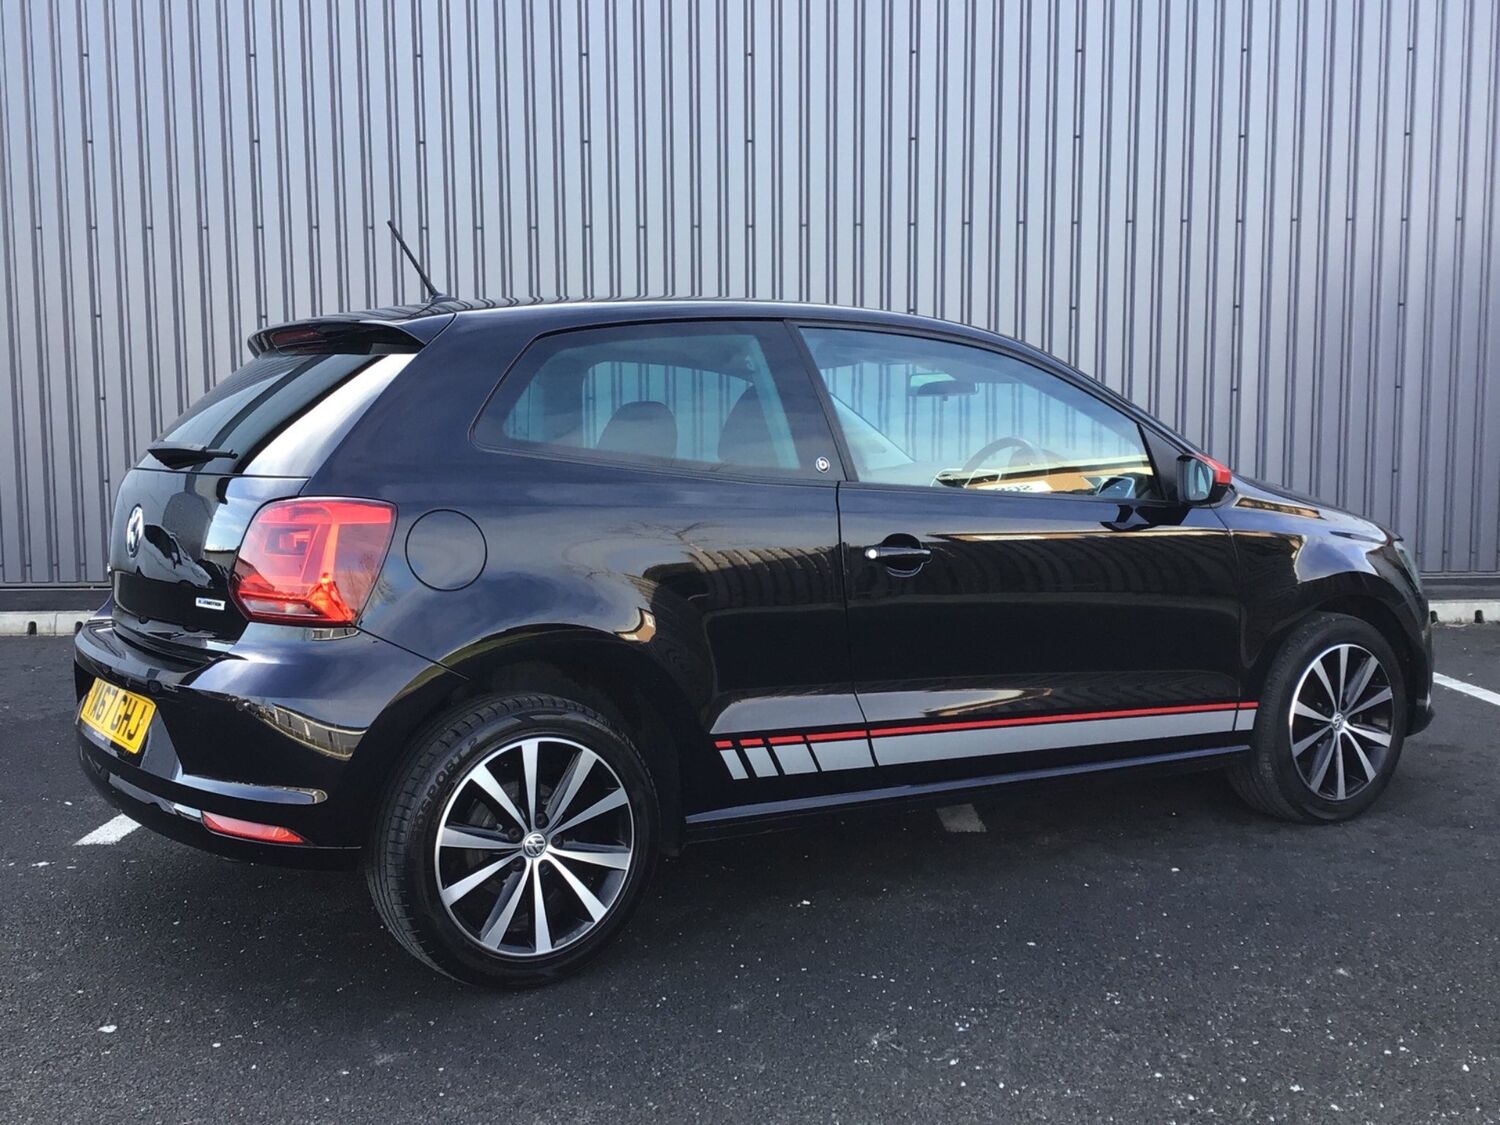 Used VOLKSWAGEN POLO in Ashby de la Zouch, Leicestershire